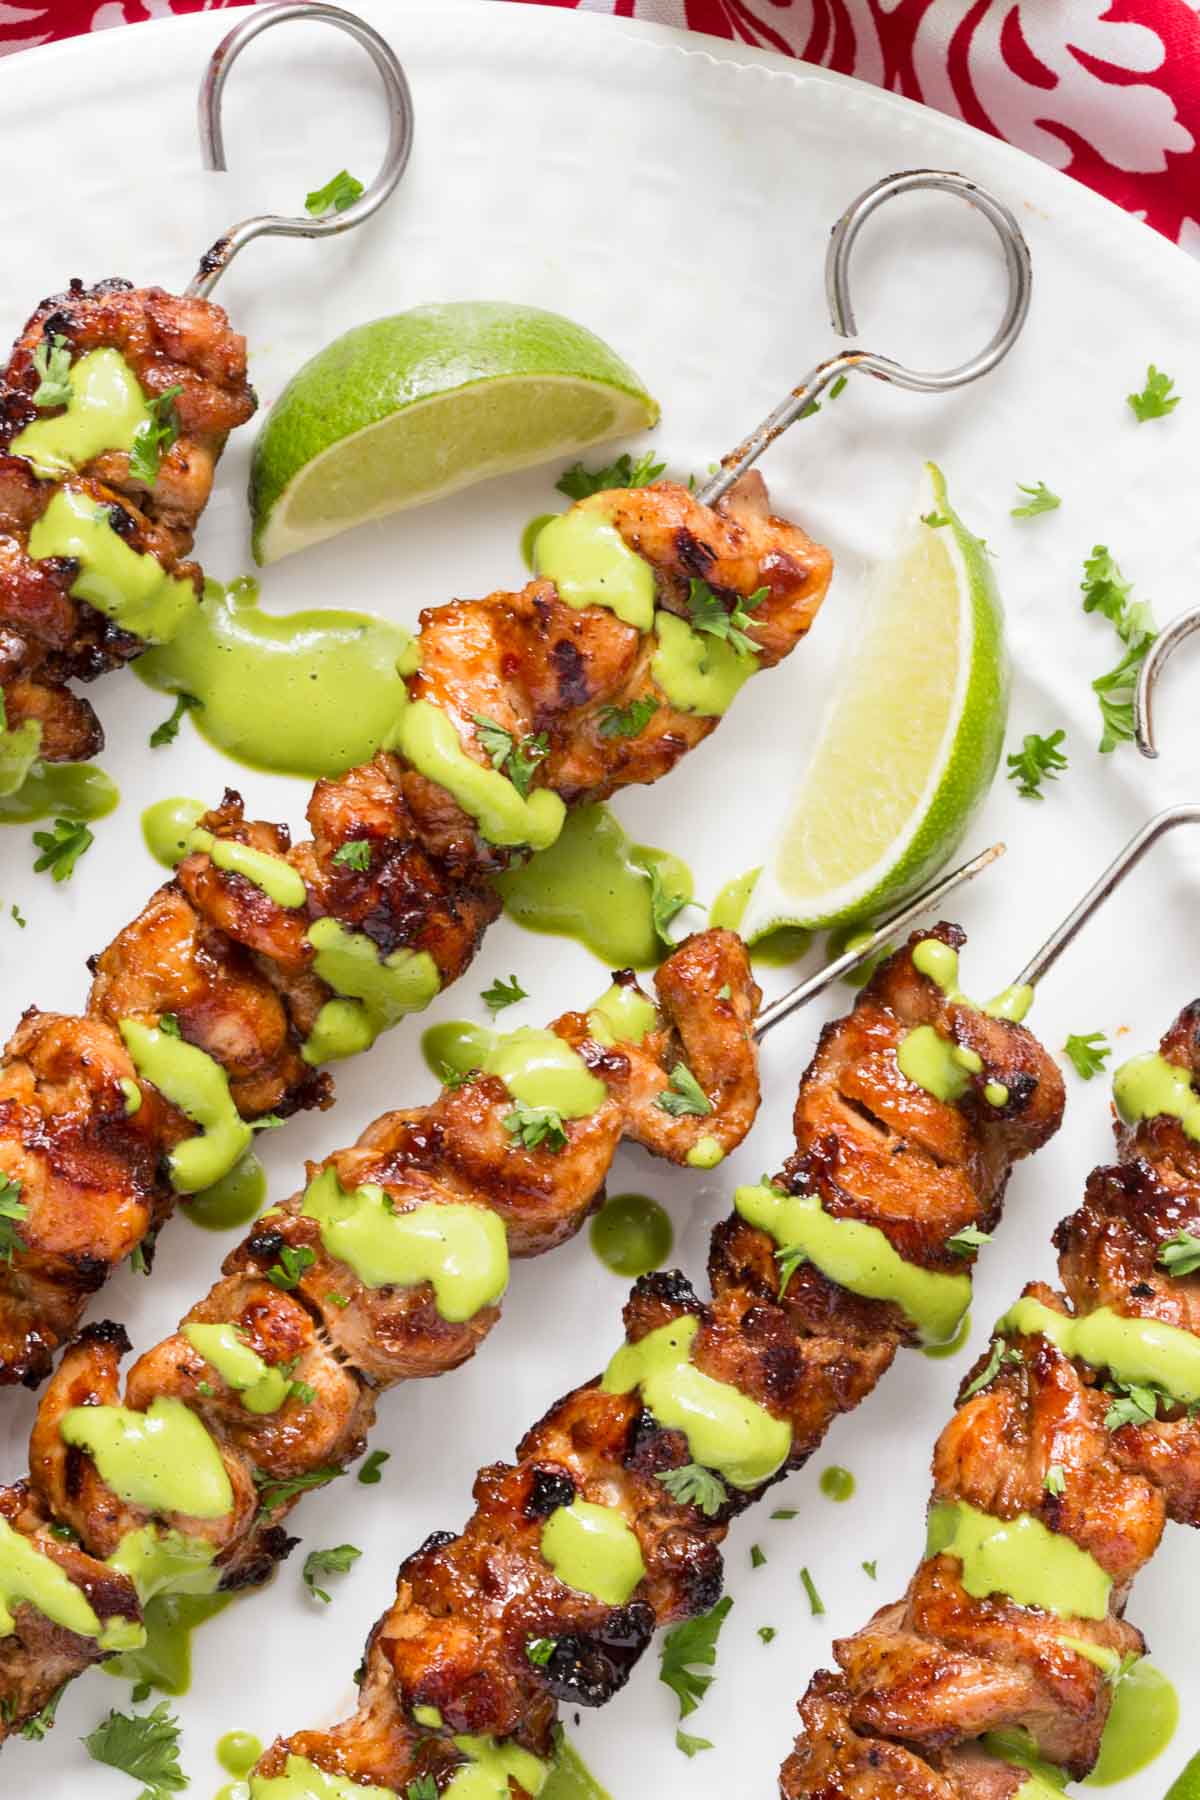 Overhead closeup photo of a white serving plate filled with Peruvian Grilled Chicken Skewers garnished with cilantro, lime wedges and Peruvian Green Sauce.